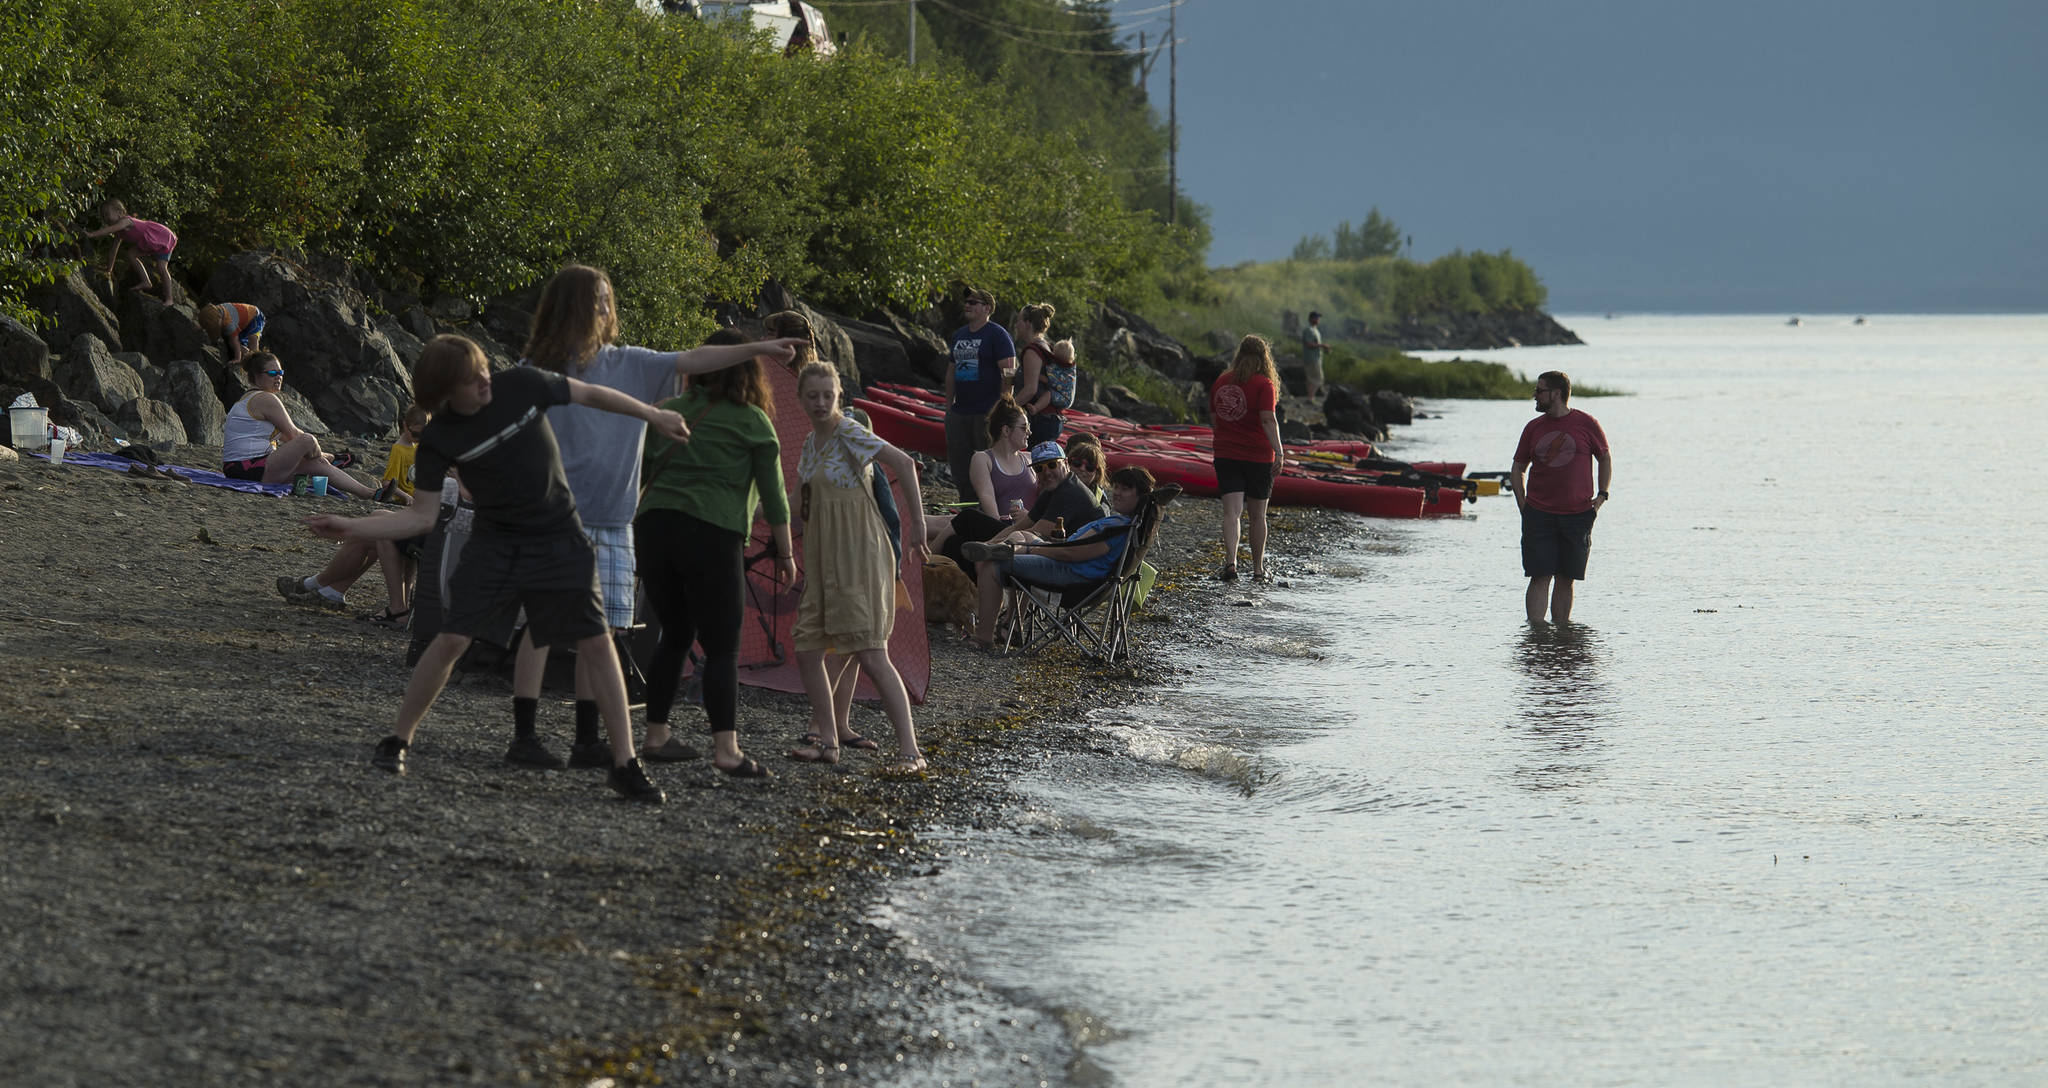 Juneau residents listen to the music of Papertrail and enjoy the beach during a solstice party at the North Douglas Boat Launch on Wednesday, June 20, 2018. (Michael Penn | Juneau Empire)